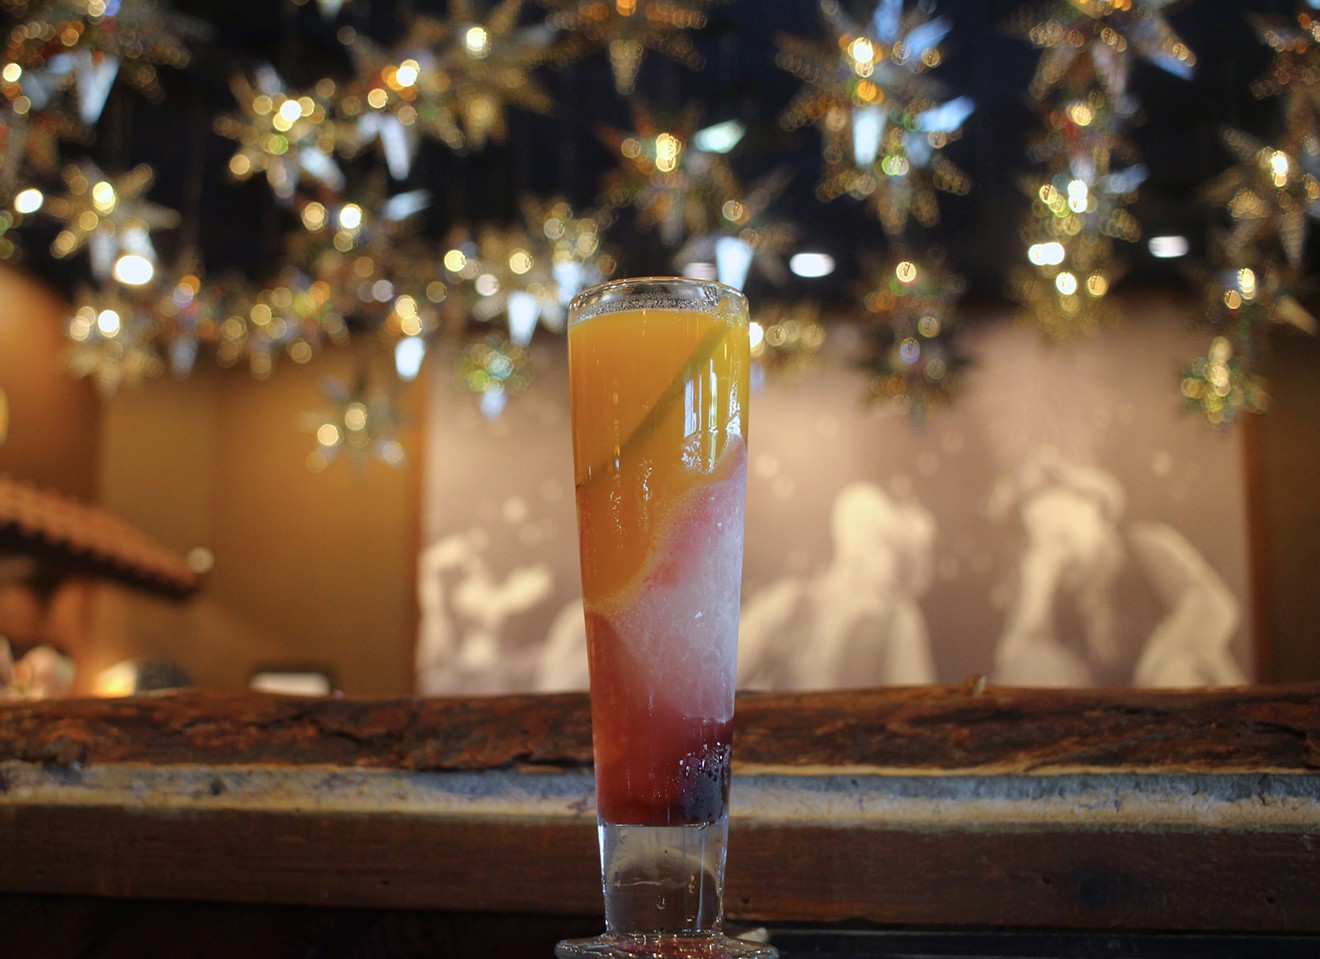 The Frozen Sunburst at Mariano's Hacienda will dim the lights with frozen sangria and tequila-infused strawberry and mango purees.